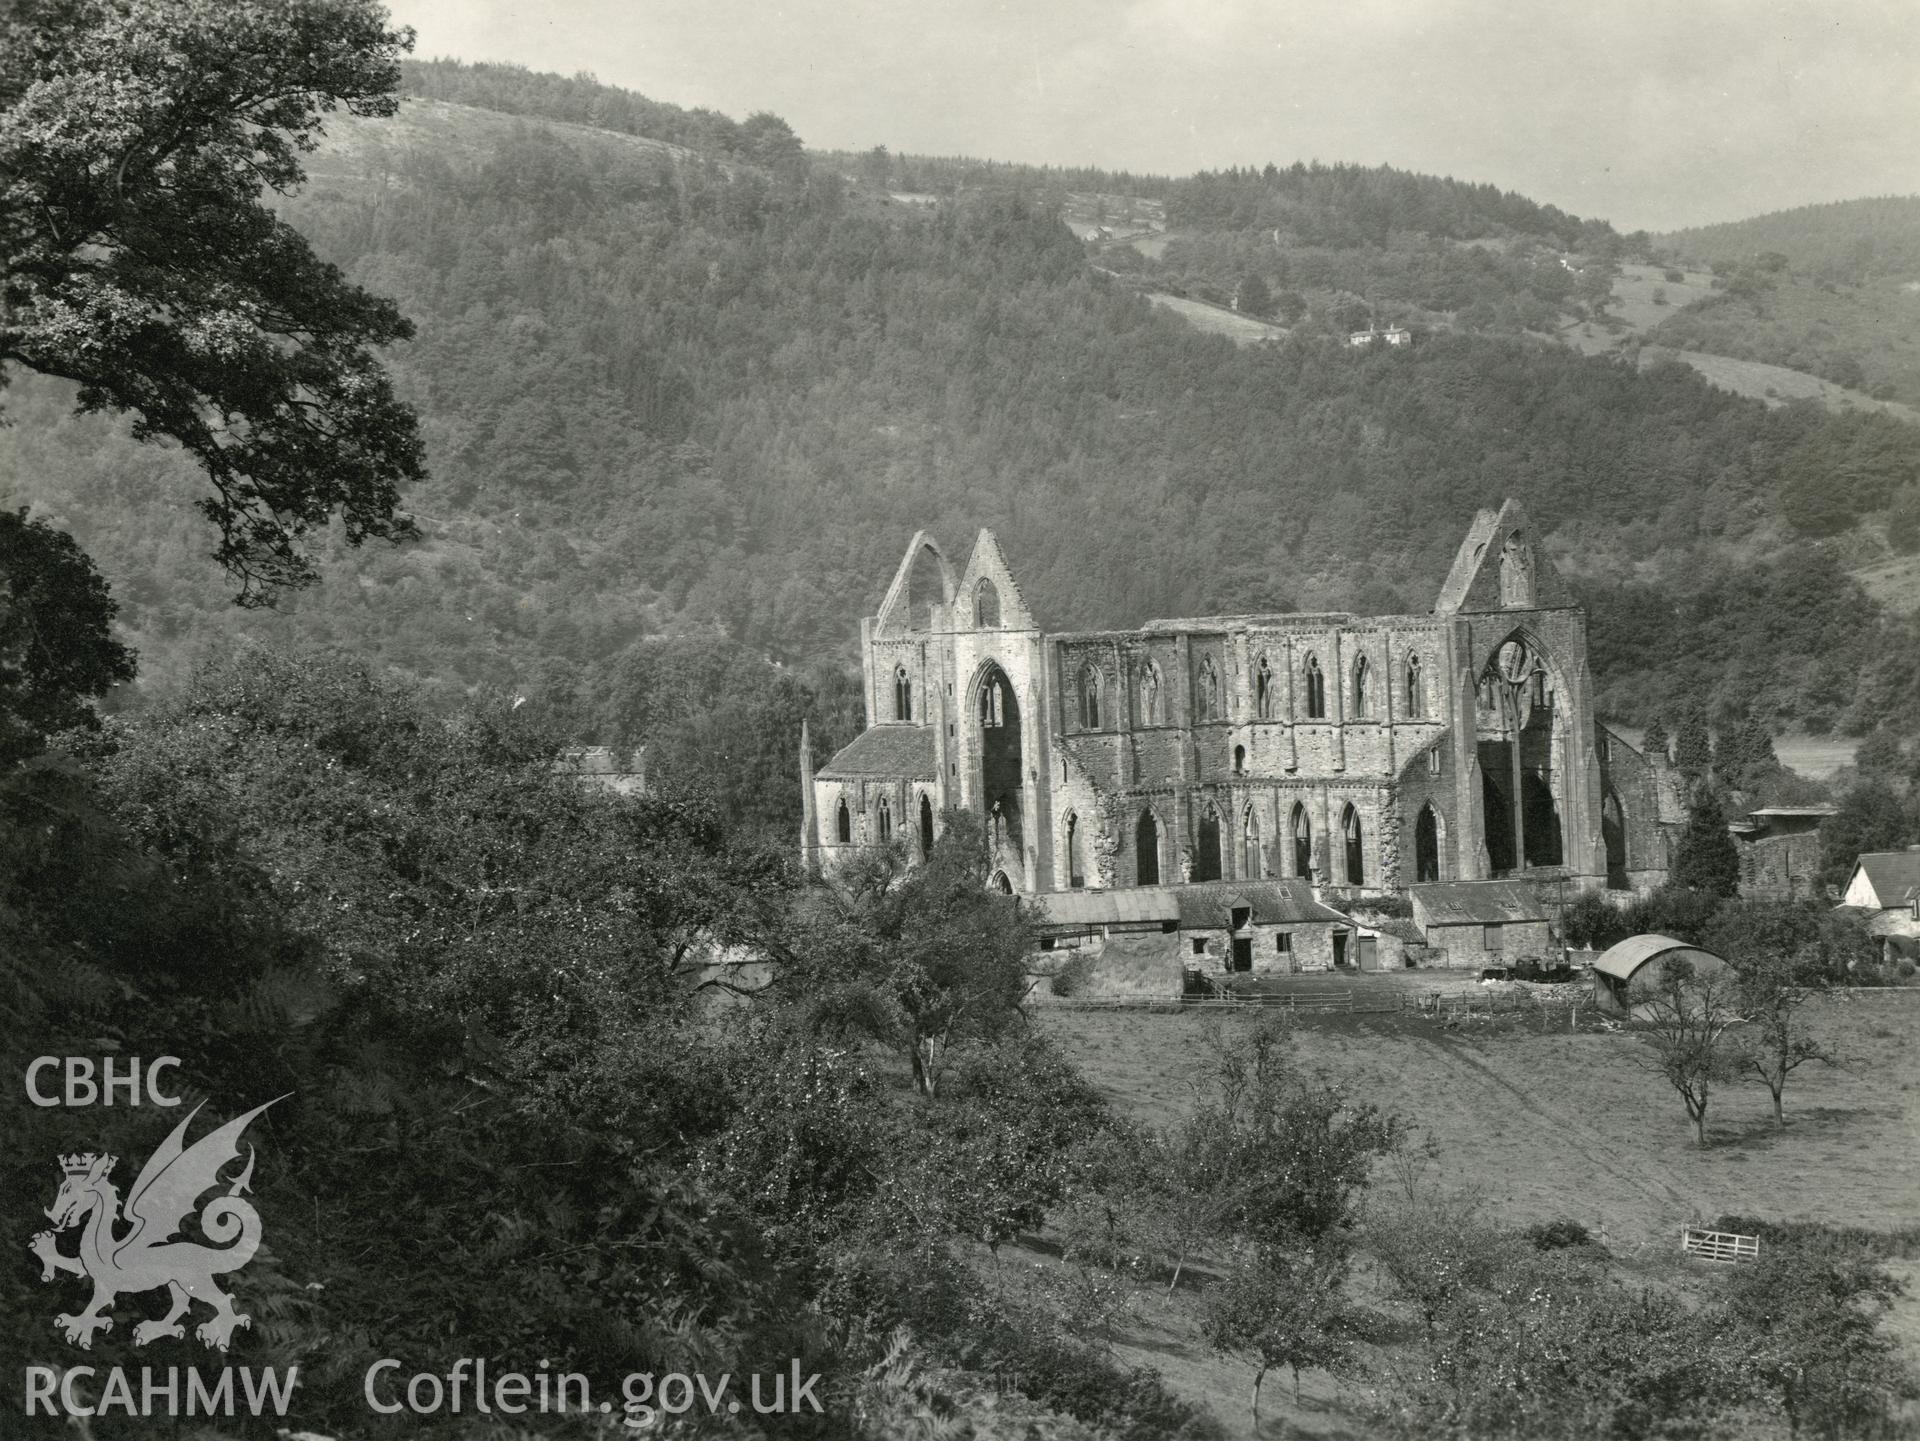 Digital copy of a view of the west front of Tintern Abbey taken by Shirley Jones, dated 1943.